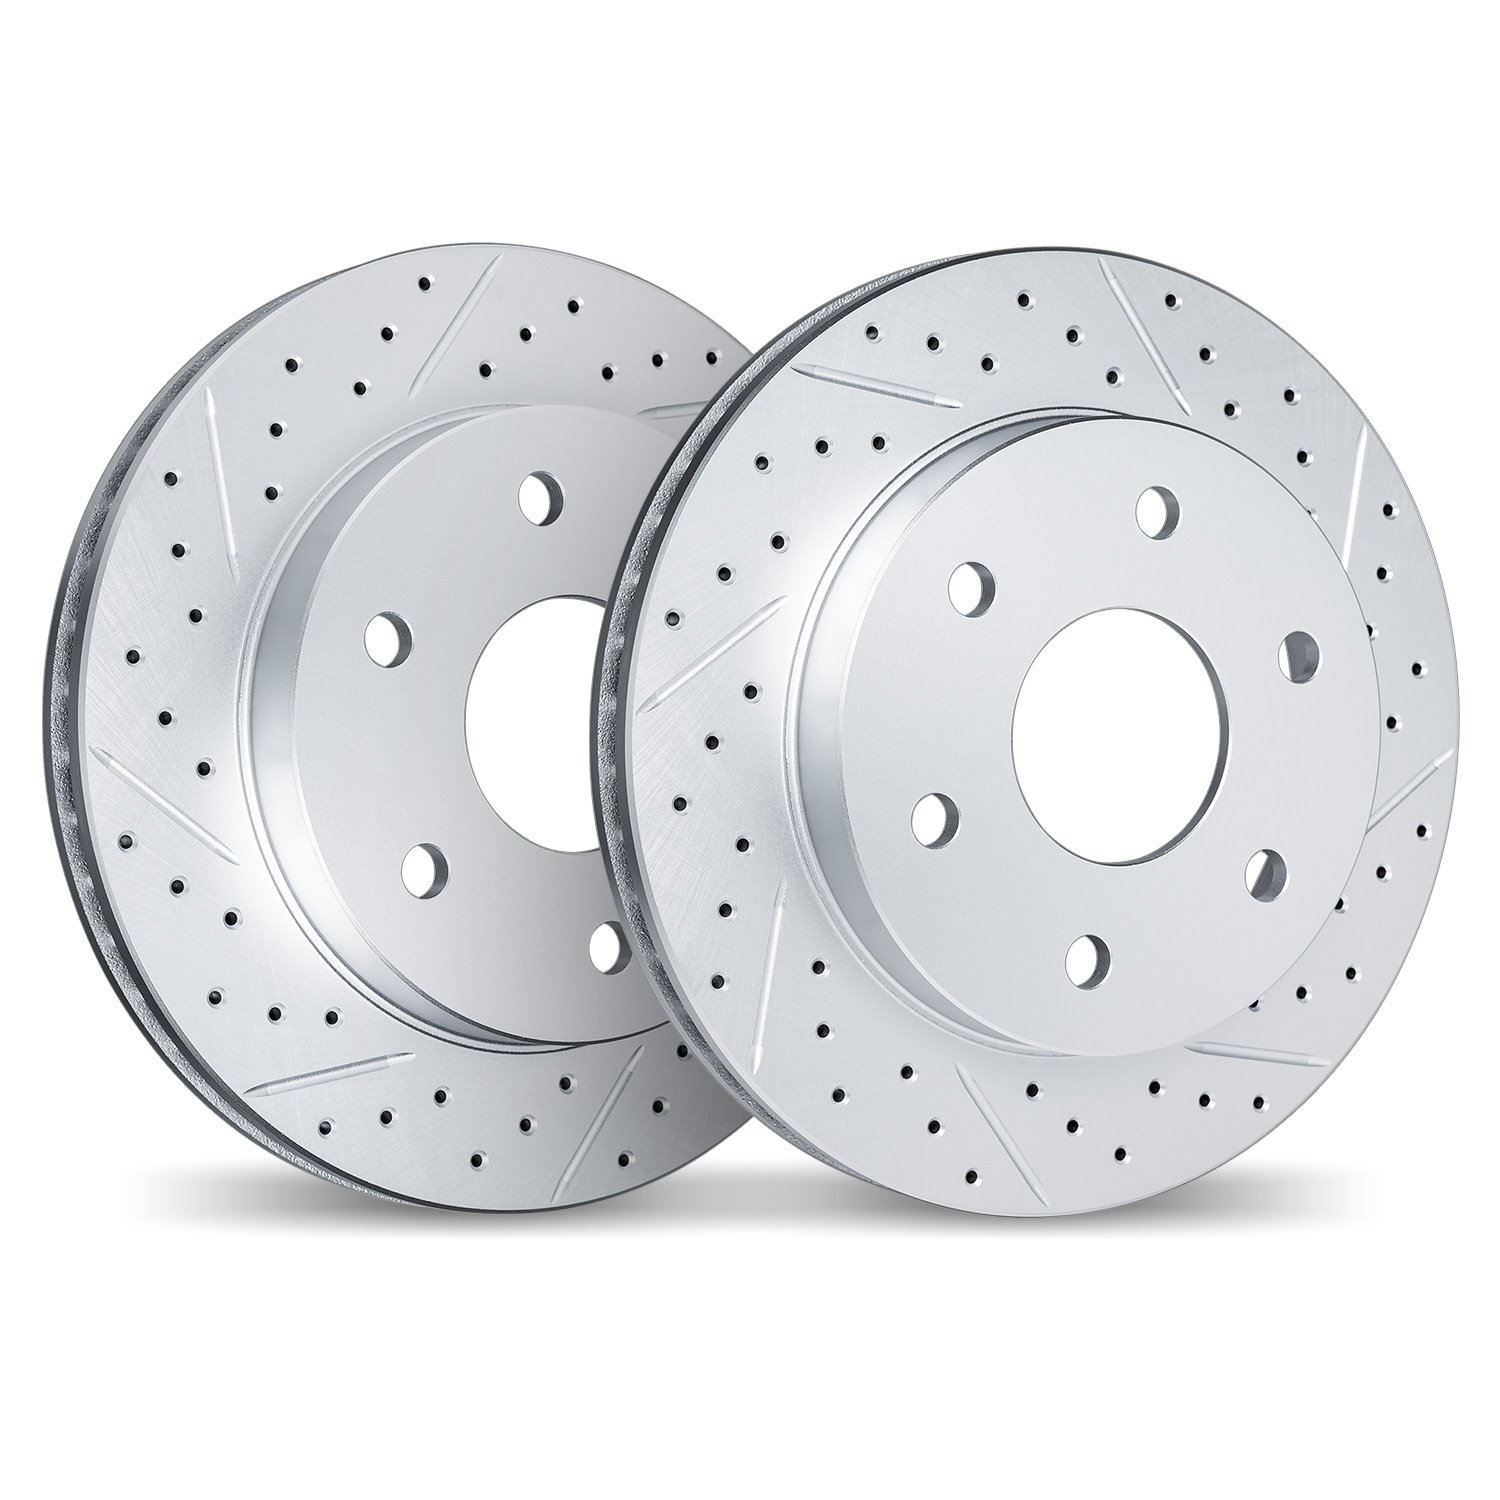 2002-67019 Geoperformance Drilled/Slotted Brake Rotors, 1985-2002 Infiniti/Nissan, Position: Front